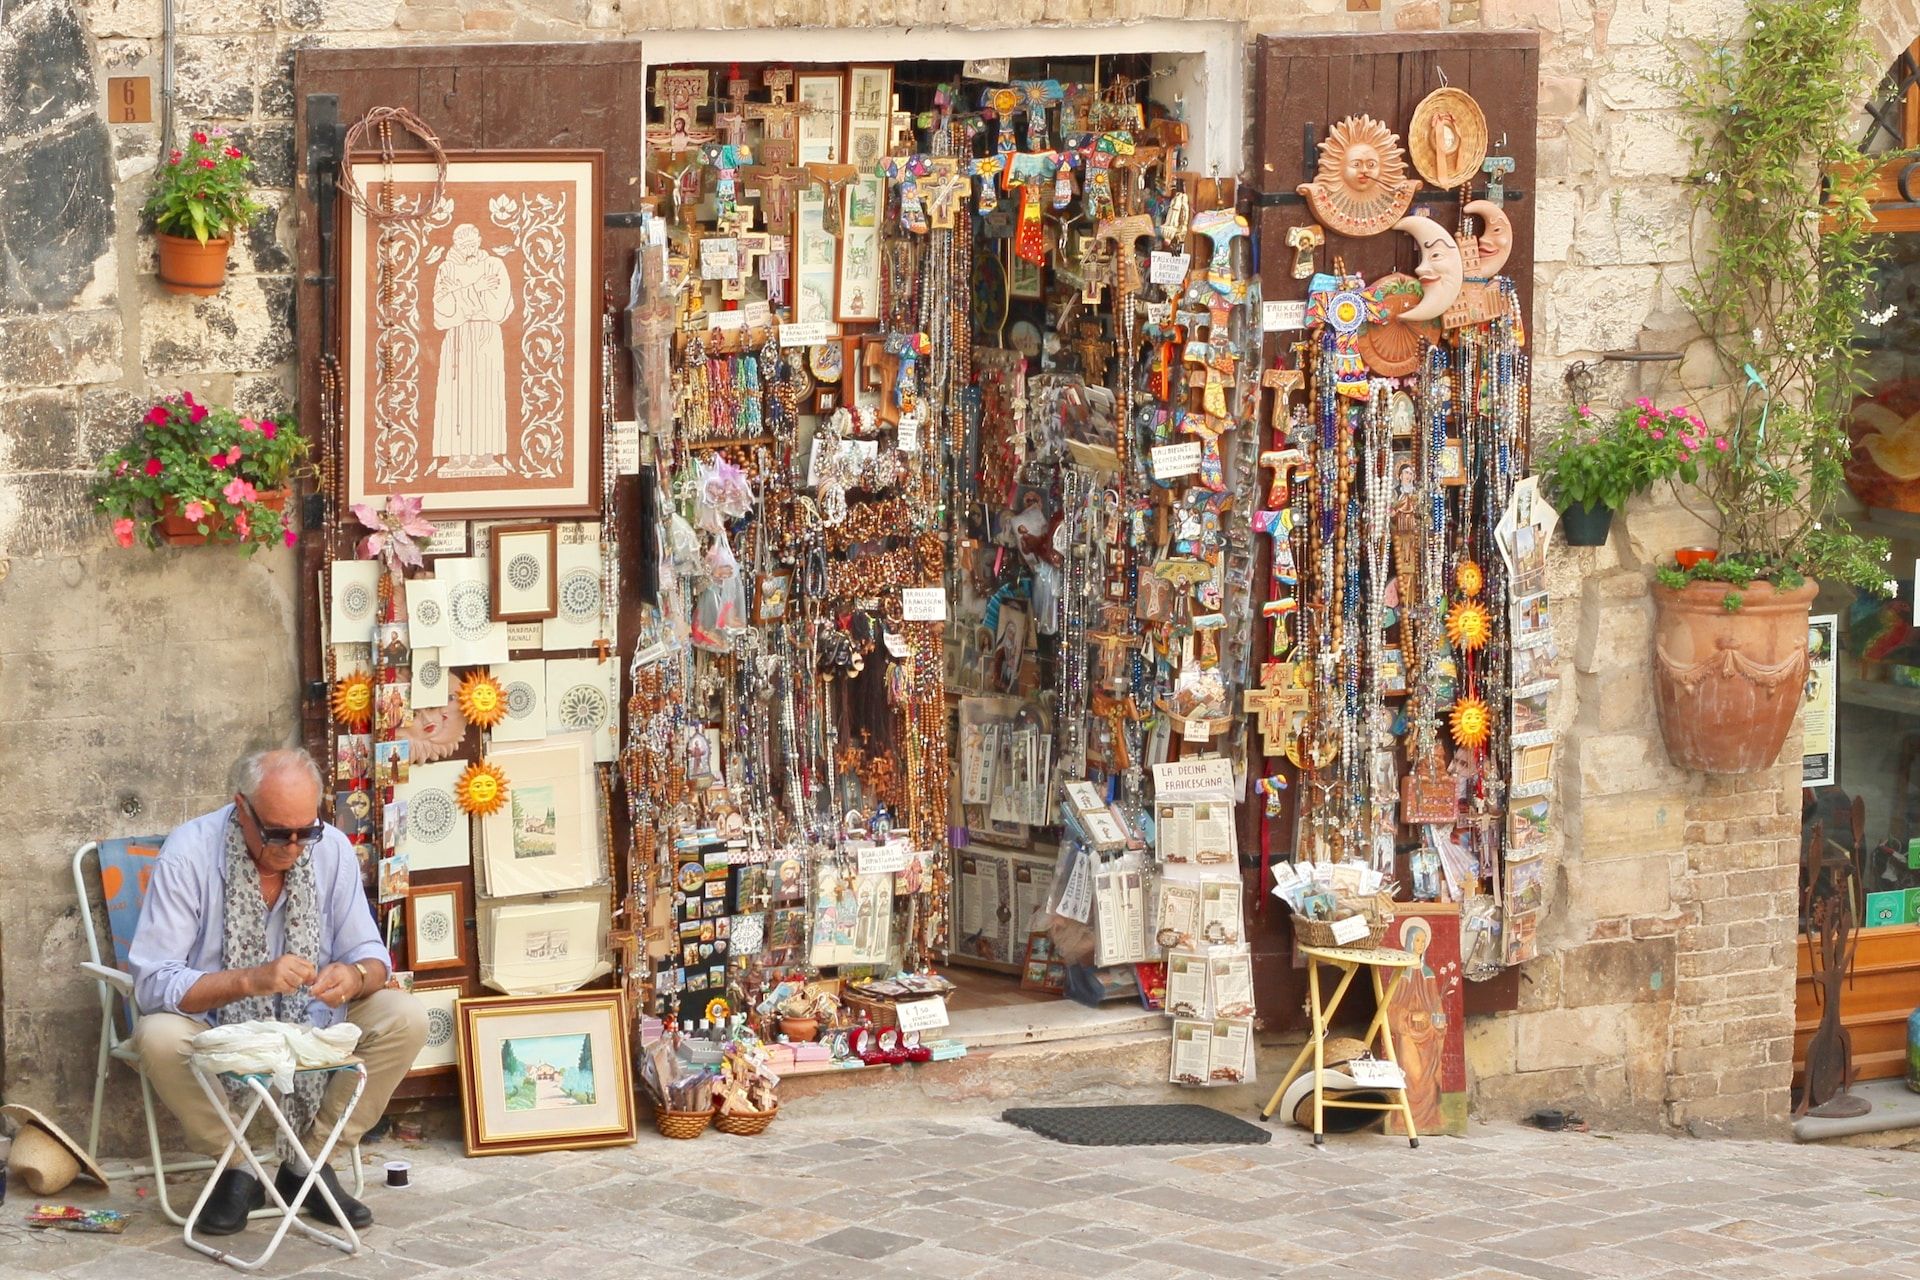 A tempting souvenir shop in Assisi, Italy